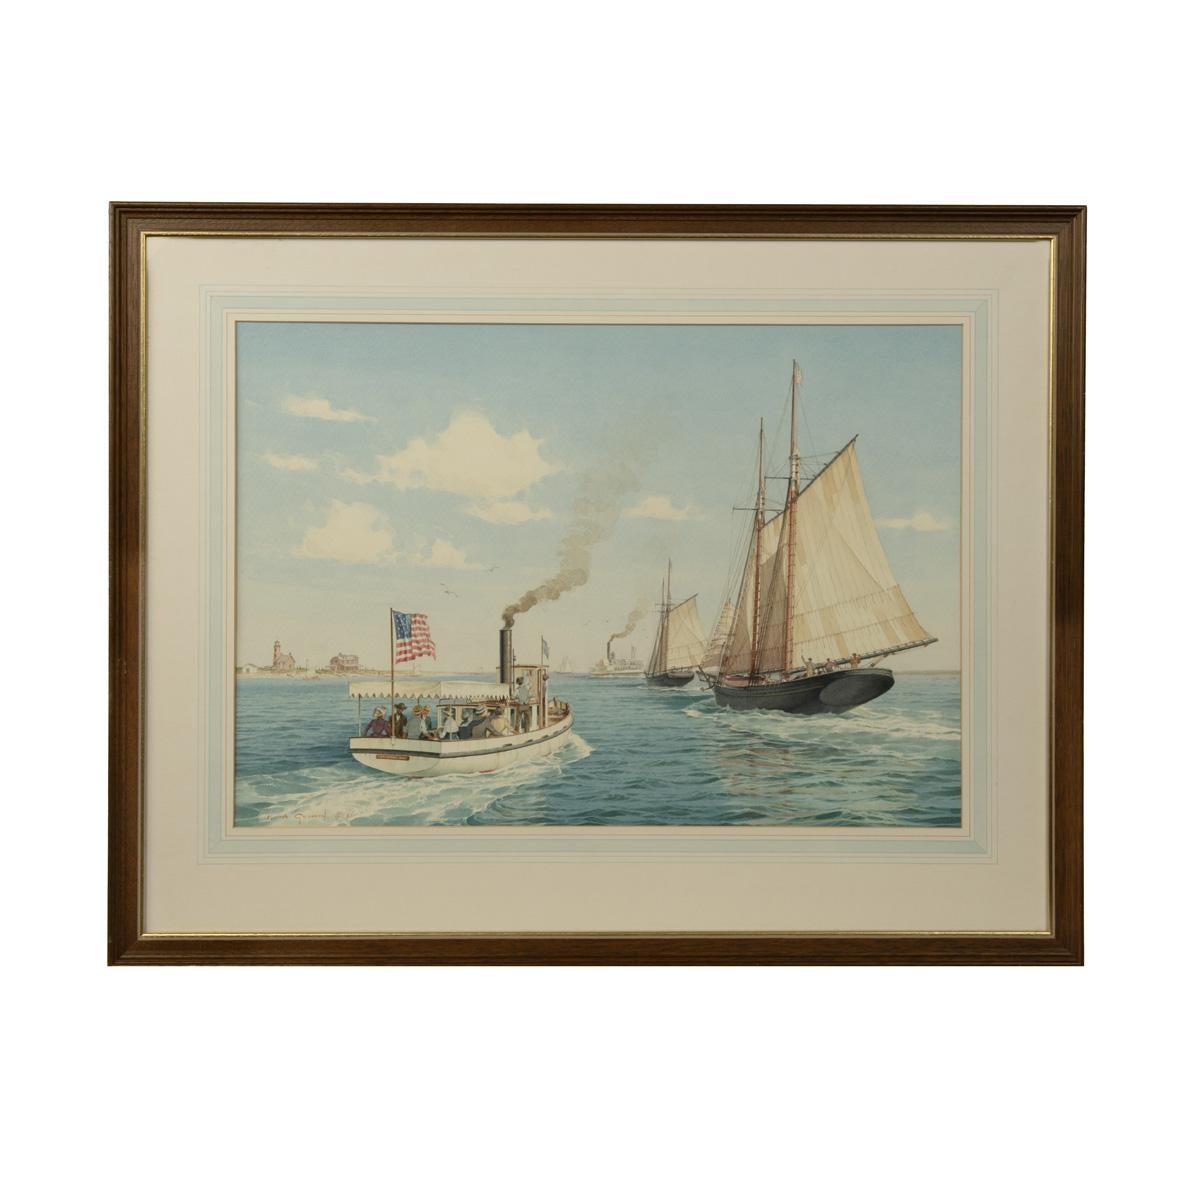 The Picnic, Island Belle, & the schooner Harry L Belden, Nantucket Harbour, U.S.A. (circa 1890) by K. A. Griffin, watercolour on paper, showing a steam launch filled with day trippers and flying the Stars & Stripes, alongside two schooners with a